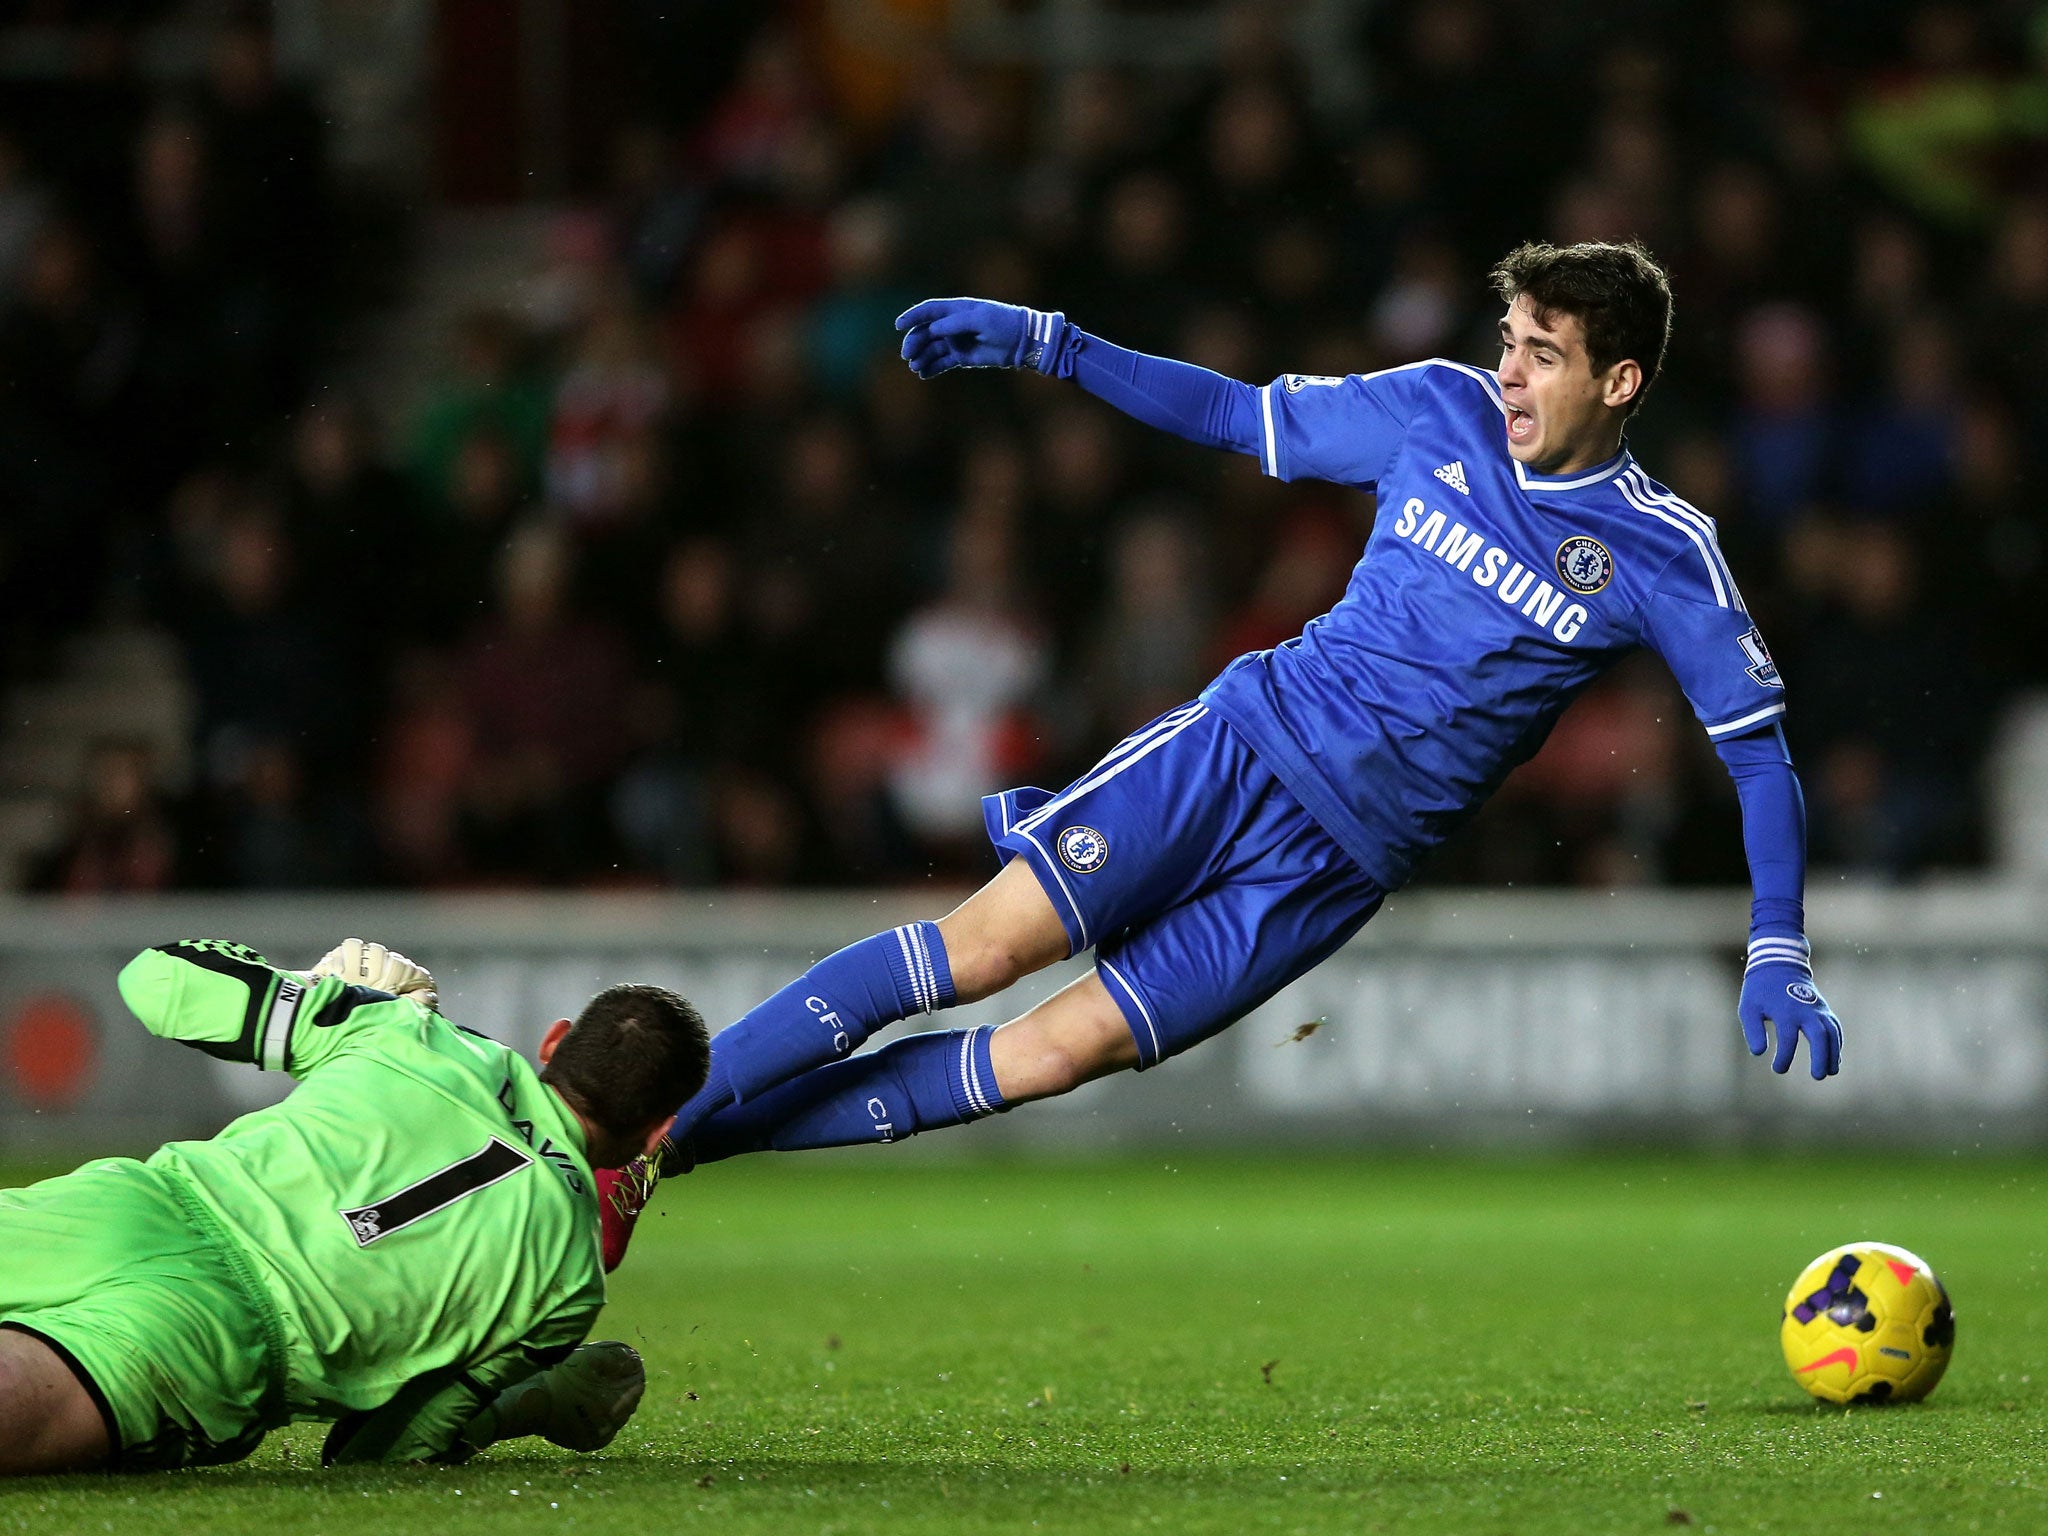 Chelsea attacking midfielder Oscar dives to try and win a penalty during the 3-0 victory over Southampton